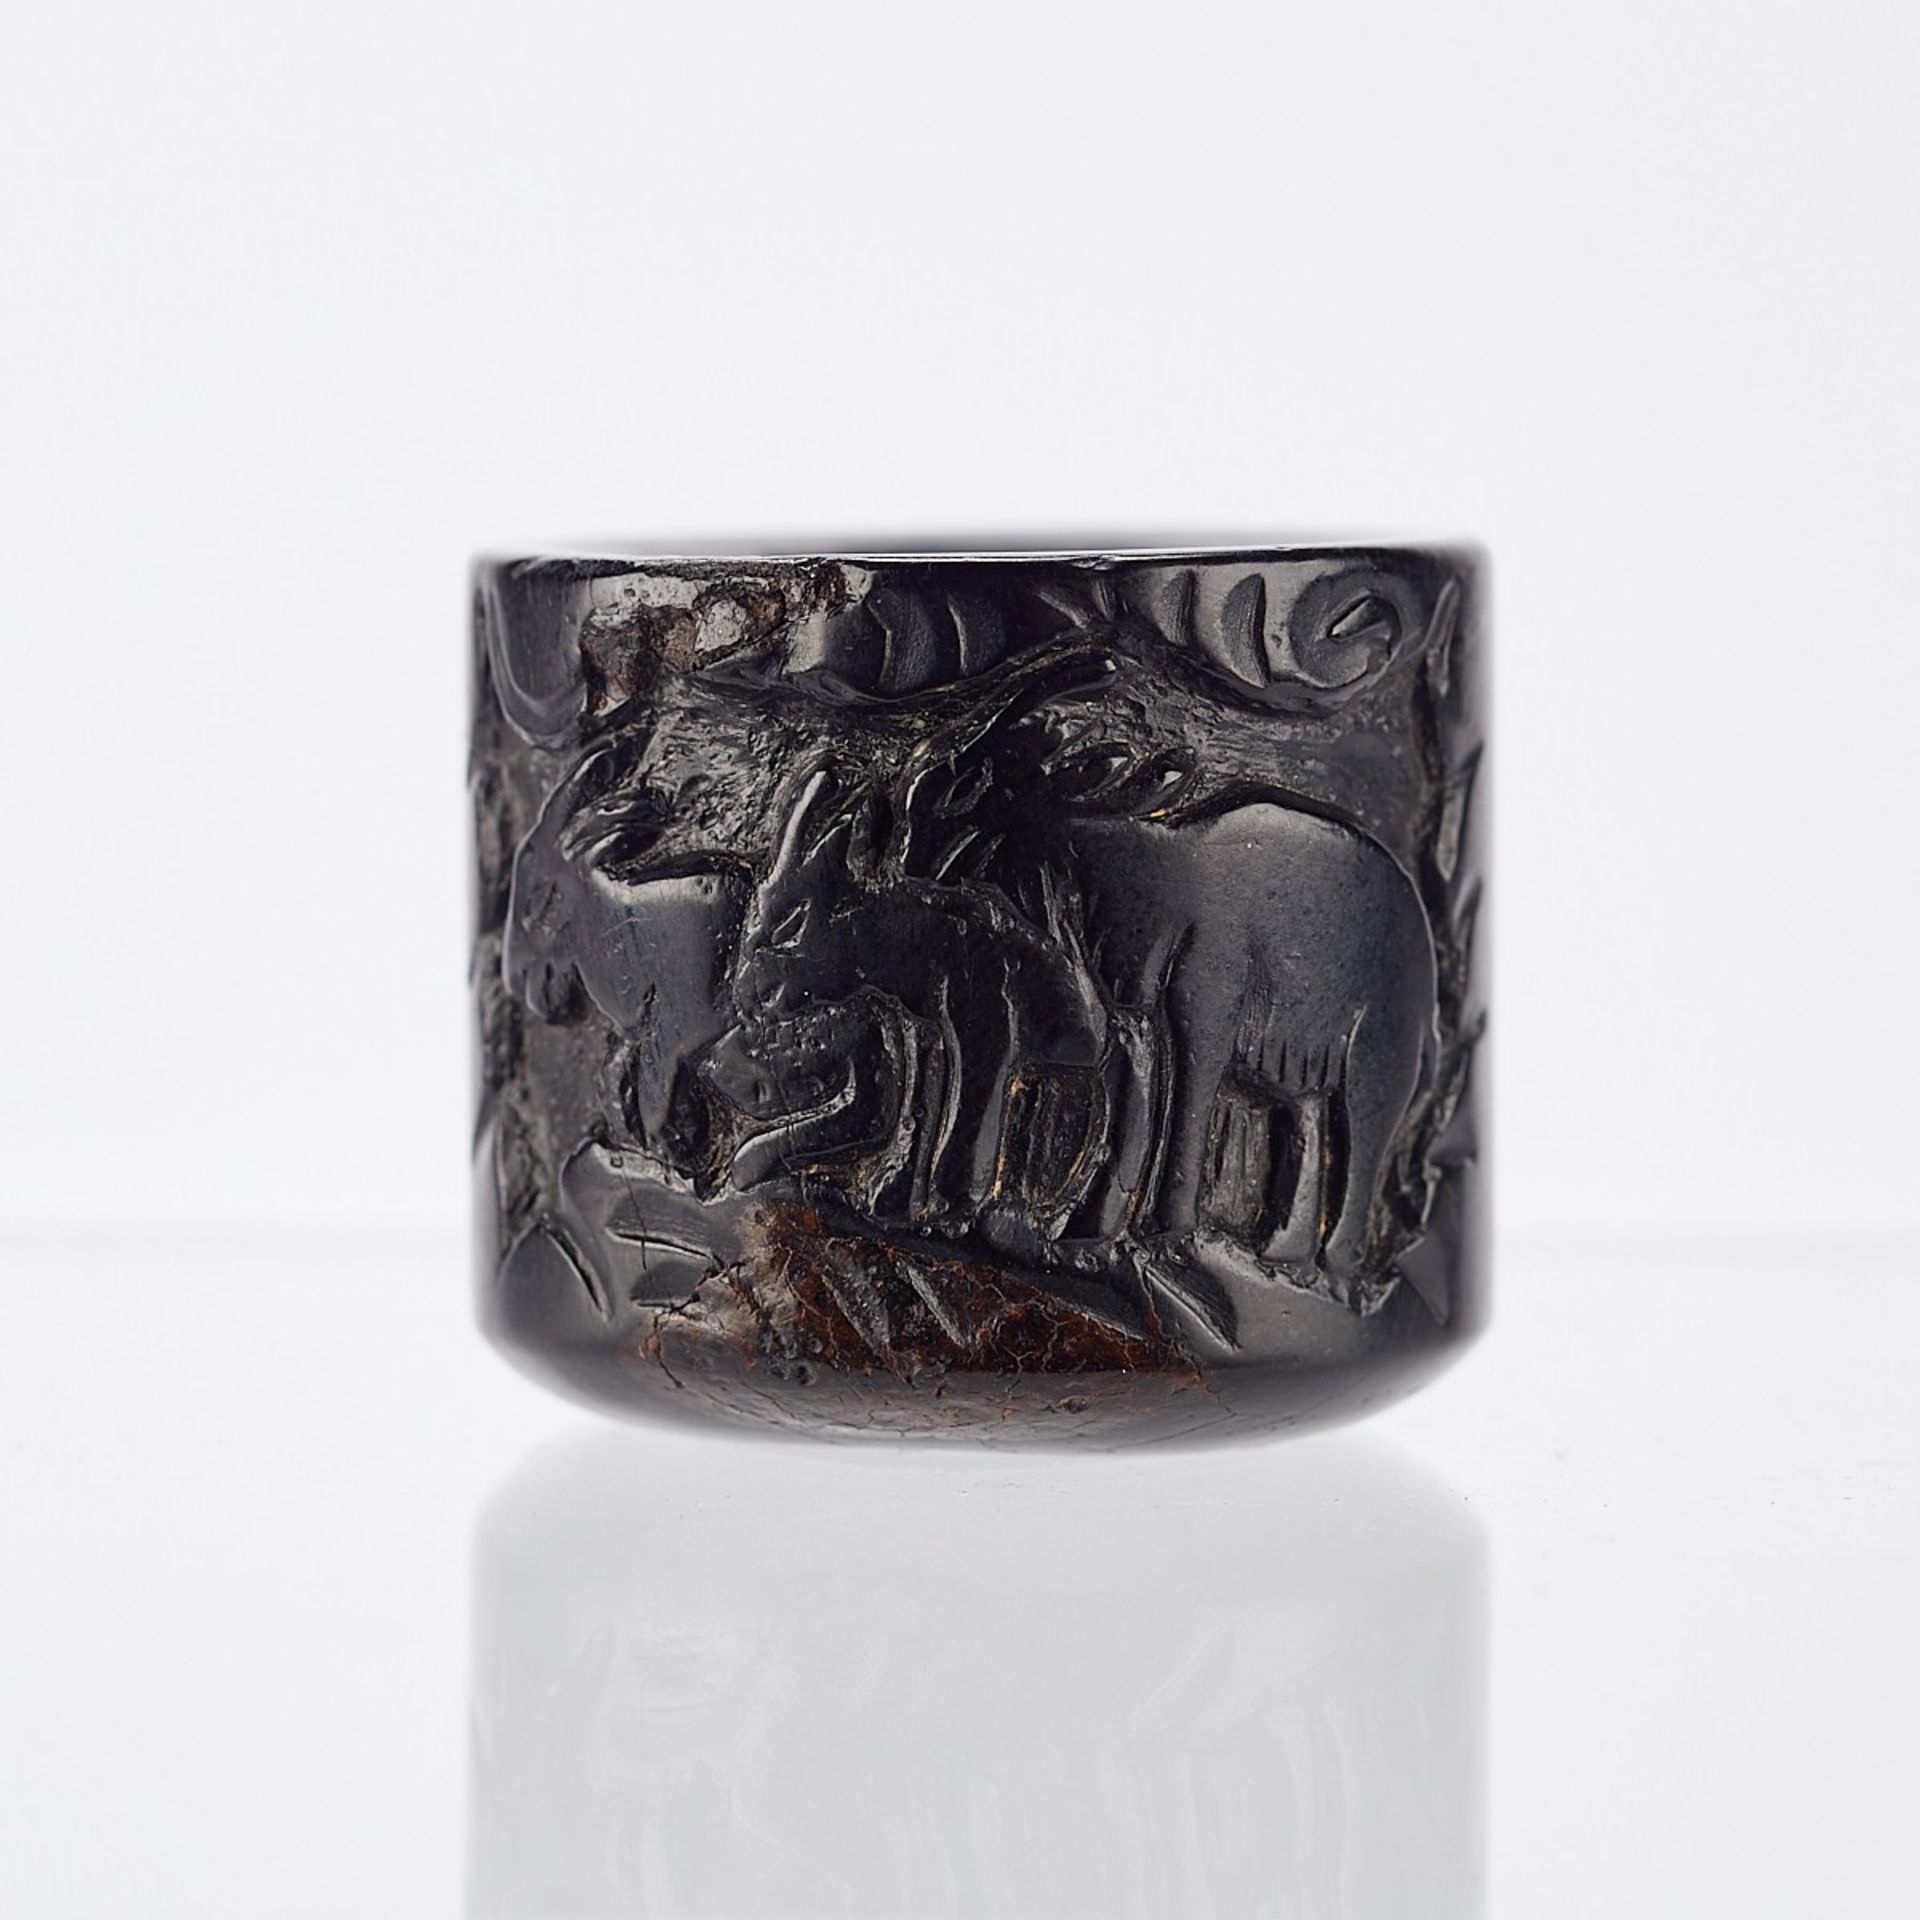 Chinese Carved Wood Archery Ring w/ Rams - Image 2 of 6